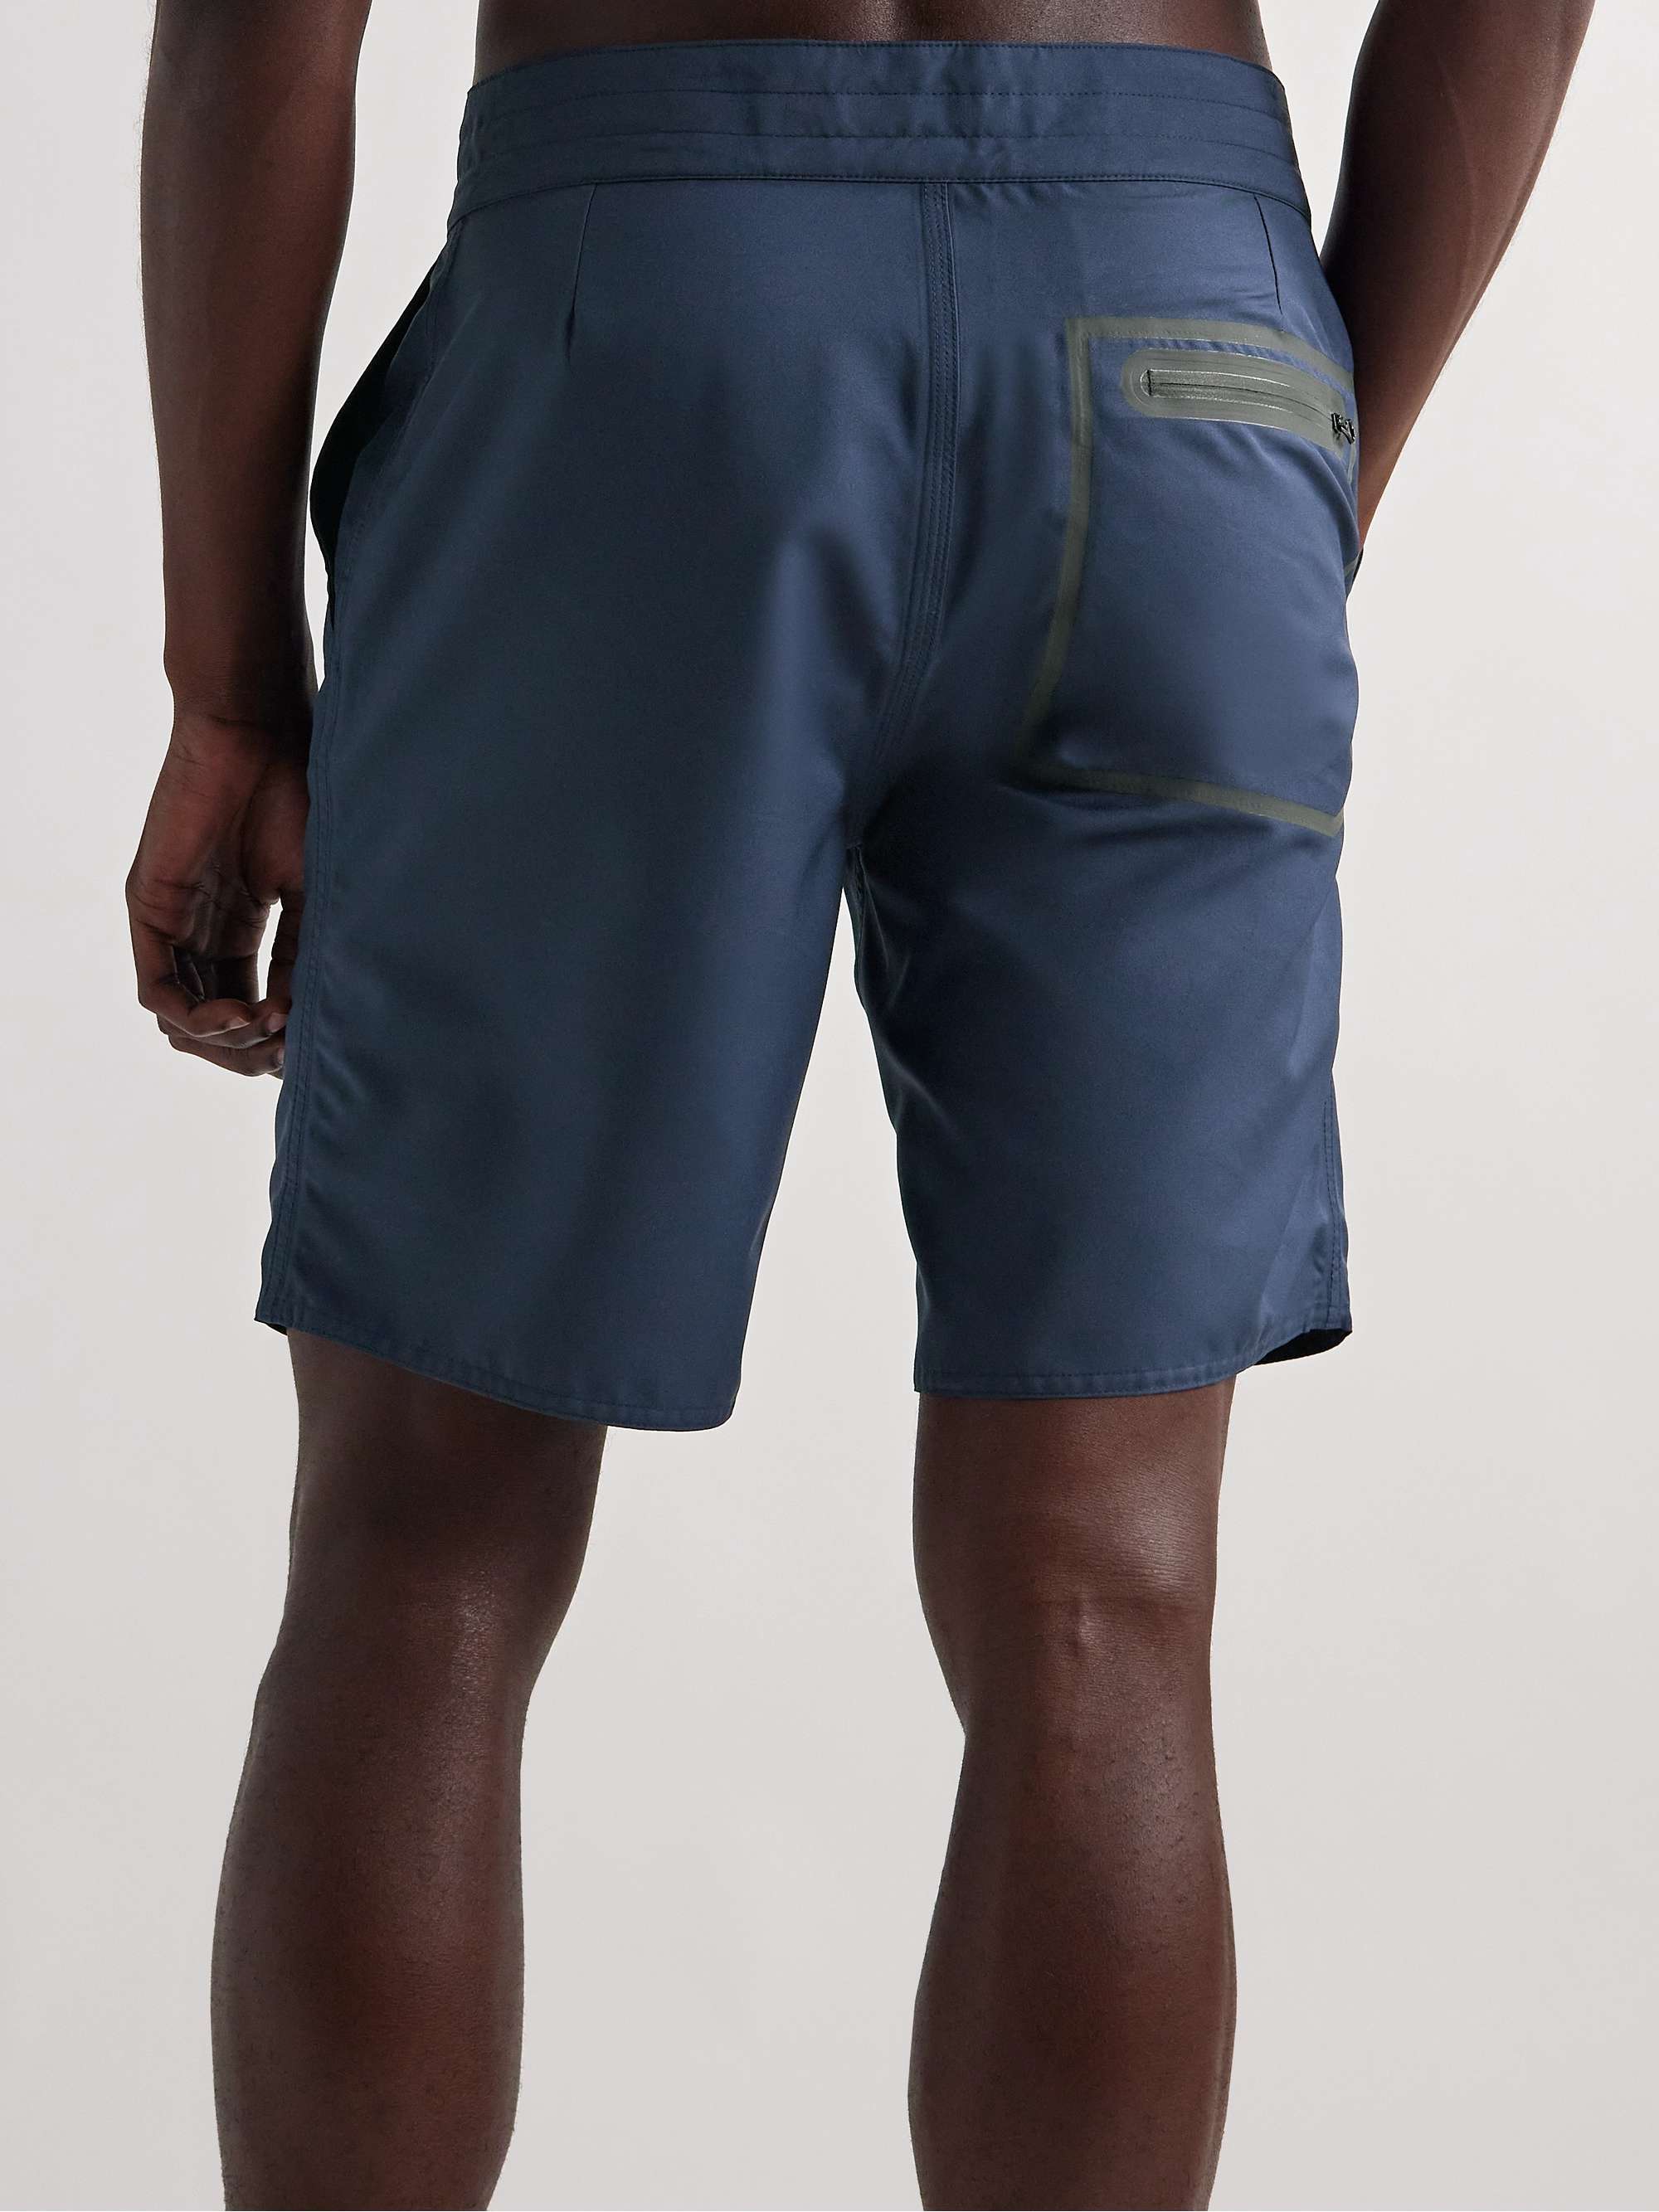 OUTERKNOWN Apex Long-Length Recycled Swim Shorts